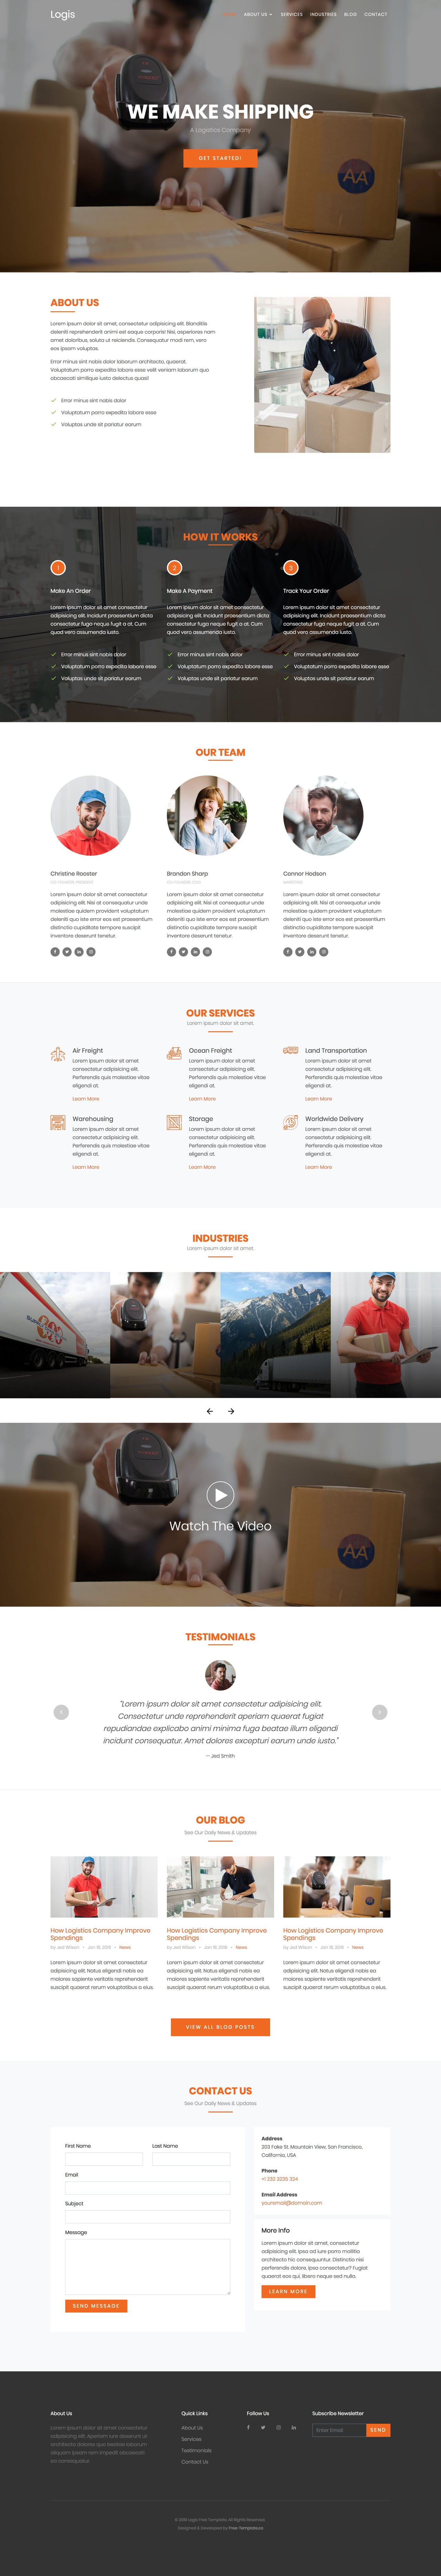 Landing page HTML template for logistics companies